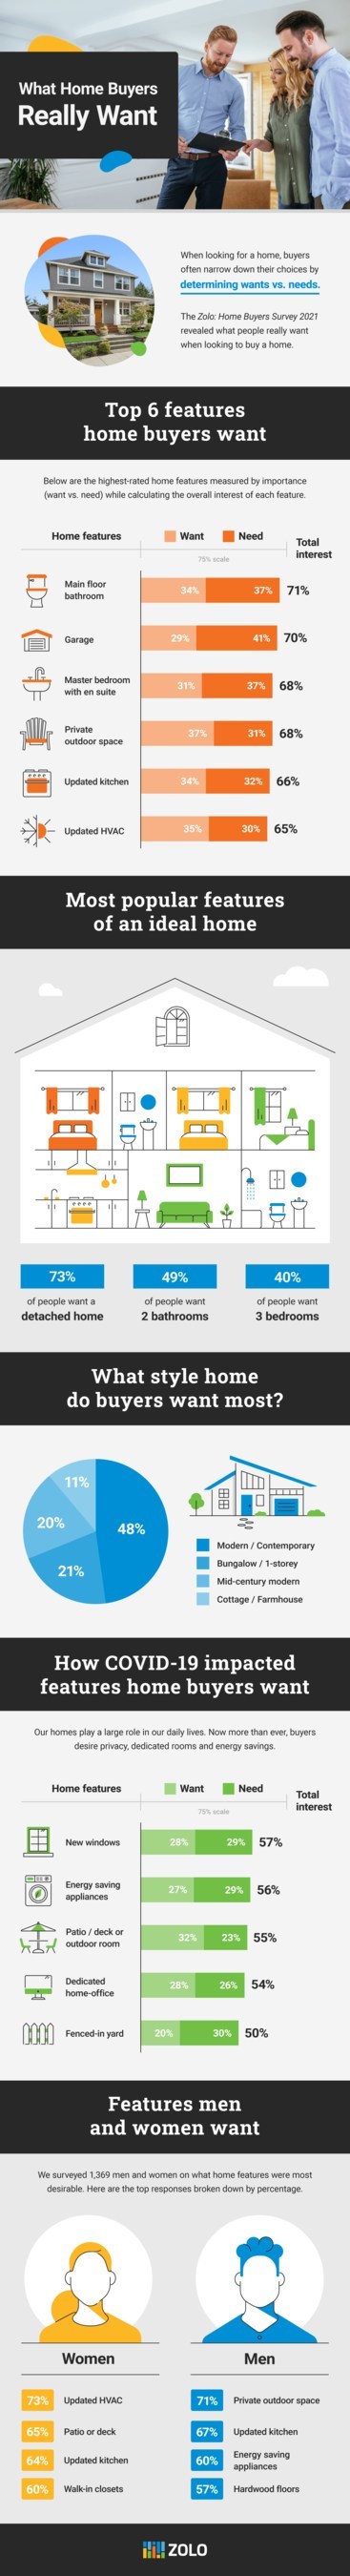 The responses from home shoppers in the Zolo Home Buyers Survey 2021 indicates a shift towards more dedicated living spaces, both inside and outside of the home, along with money-saving upgrades that can improve livability and lower the cost of living.